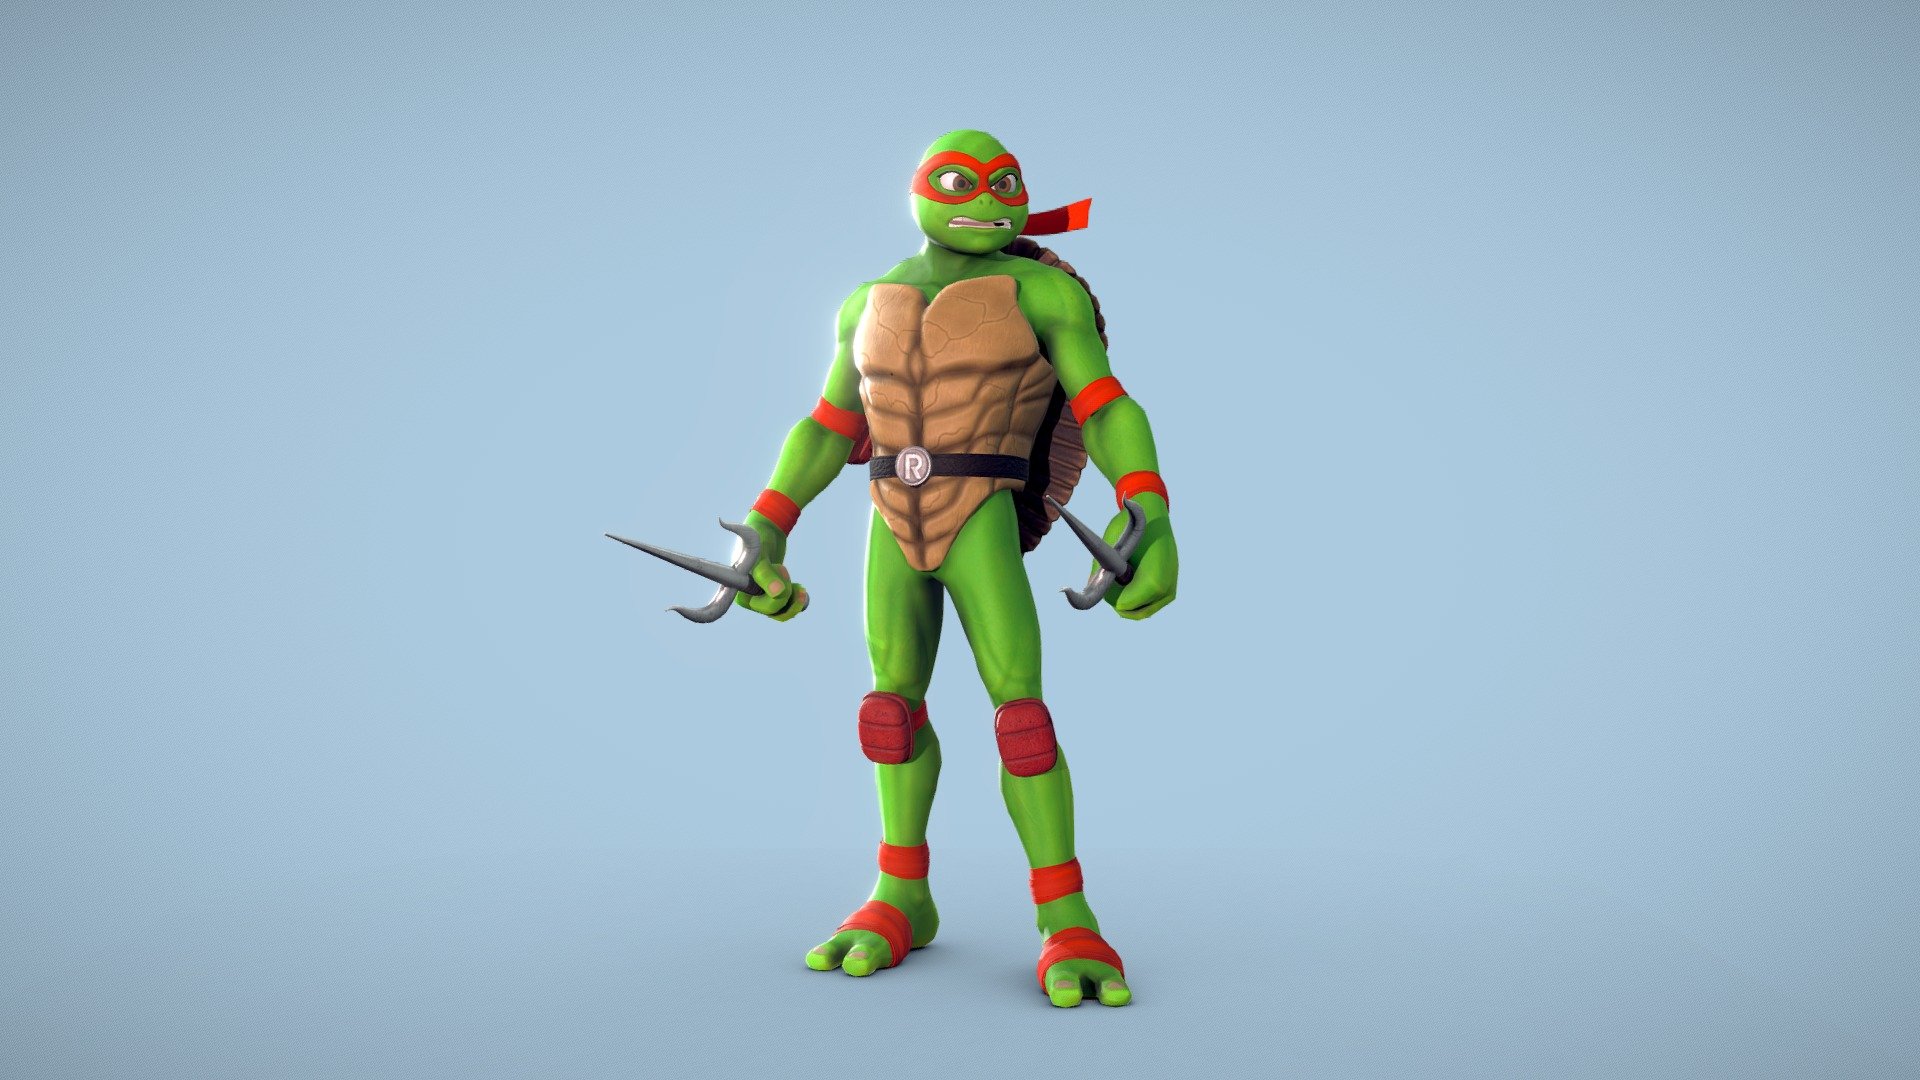 Raphael from the TMNT universe updated to my own stylized style.

Take a look of the Teenage mutant ninja turtles collection.

This model includes an A-pose version to get rigged and the High poly version of the body 3d model